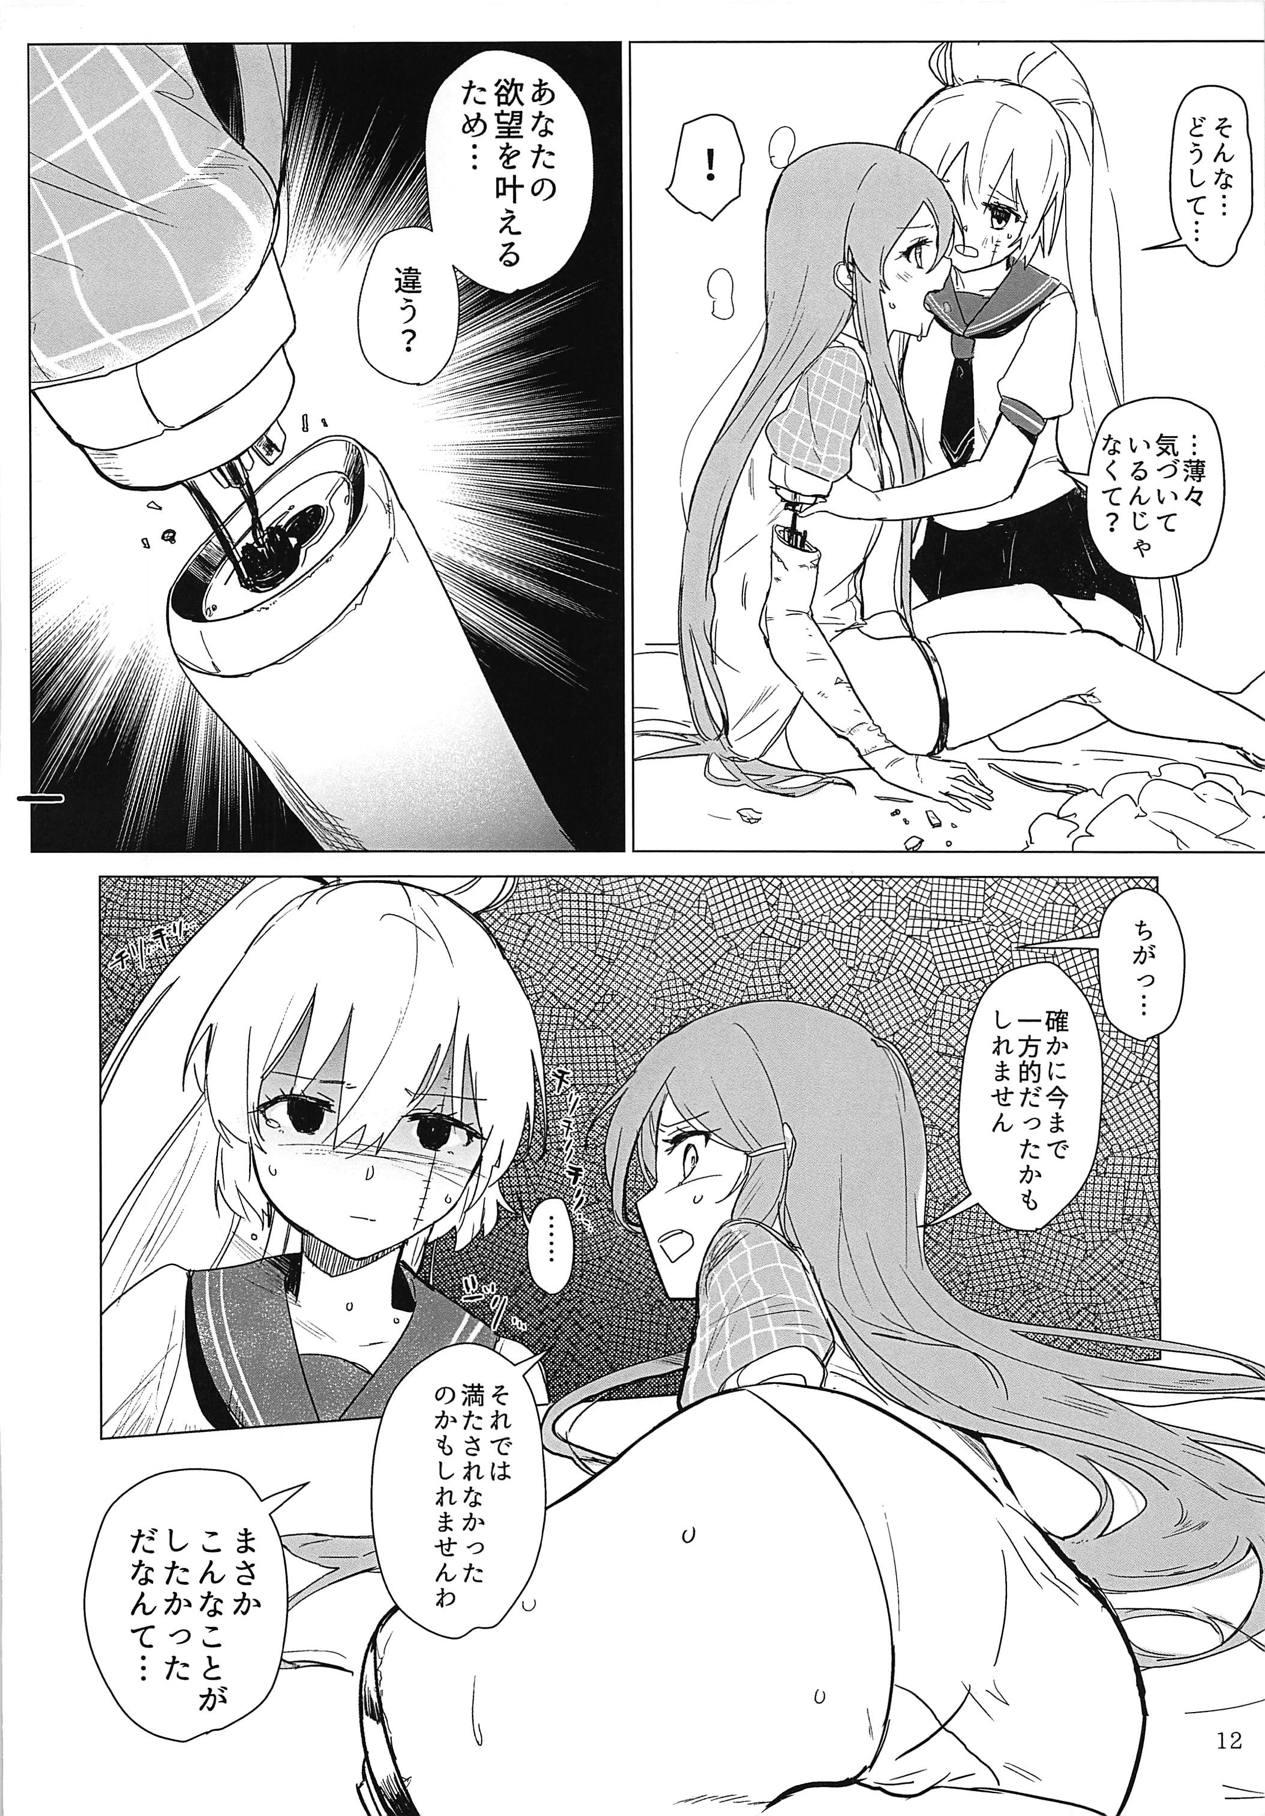 Argenta Sweet Poison in Noble Blend - Akuma no riddle Lingerie - Page 11